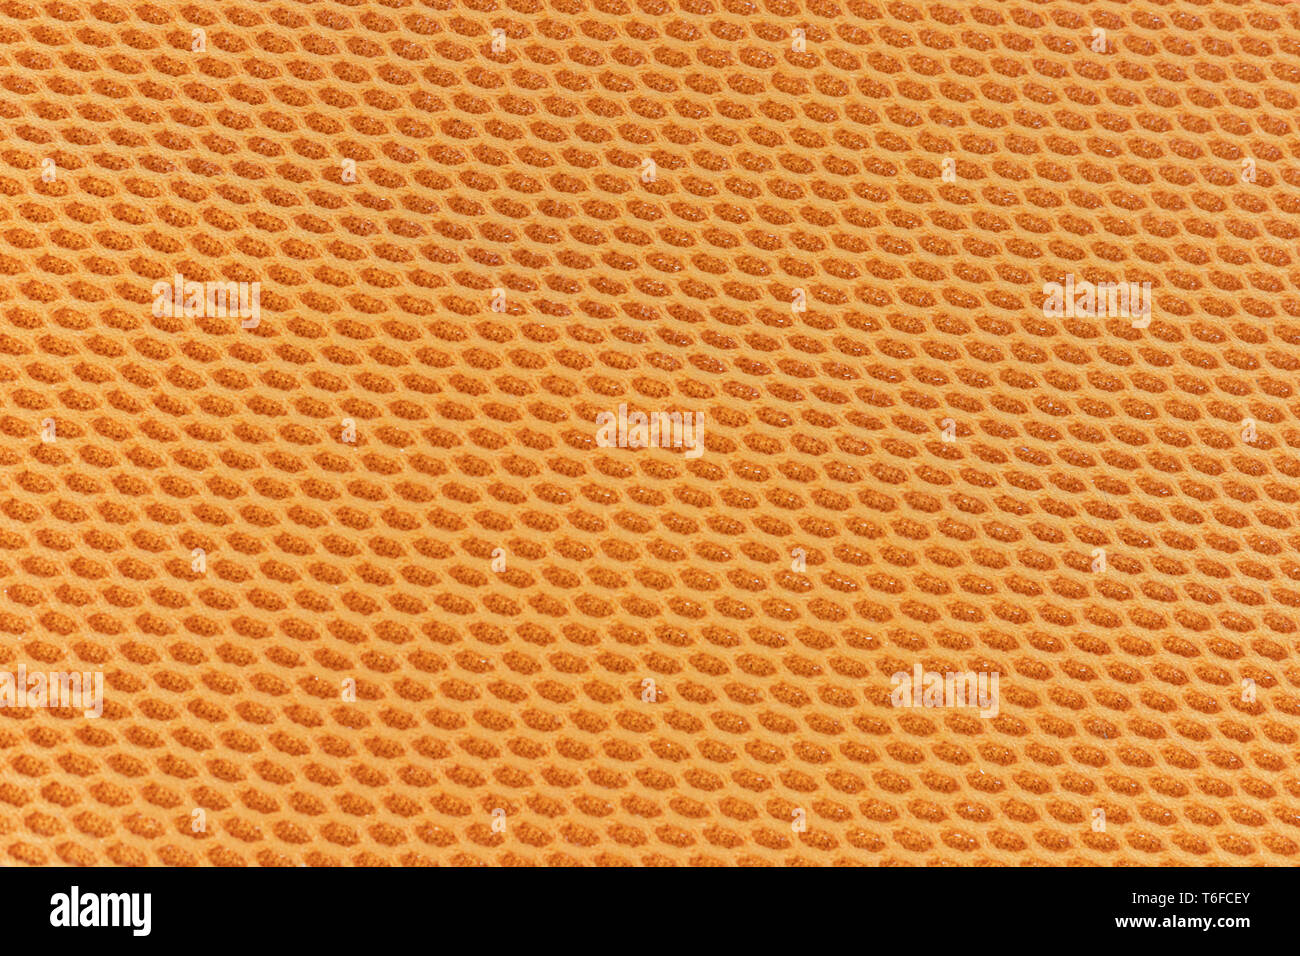 Honeycomb textured cloth flat lay, interesting hexagonal repeating pattern orange and yellow in colour Stock Photo